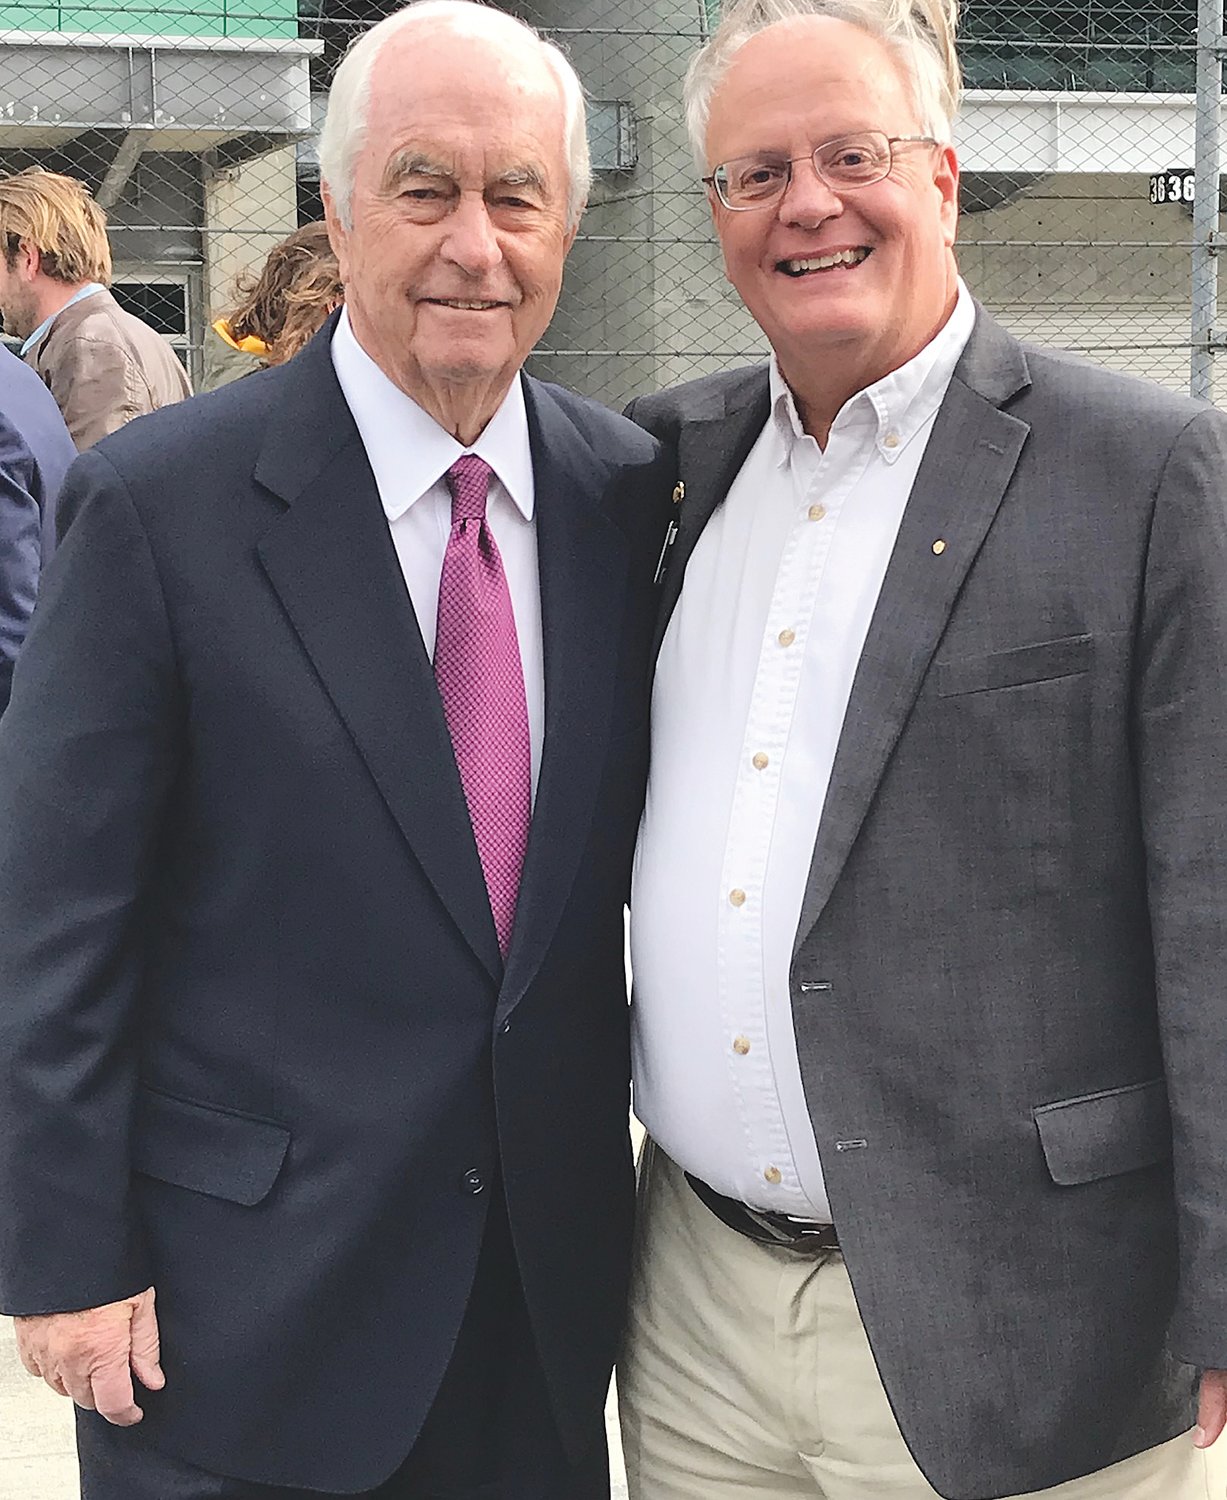 Penske Corporation Chairman and Founder Roger Penske and Indiana Racing Memorial Association Co-Chair and Co-Founder Mark Eutsler on Indianapolis Motor Speedway Pit Lane following the announcement that Penske Entertainment Corp. will acquire IMS, the INDYCAR Series, and IMS Productions from Hulman and Company. Eutsler is also a member of the Citizens